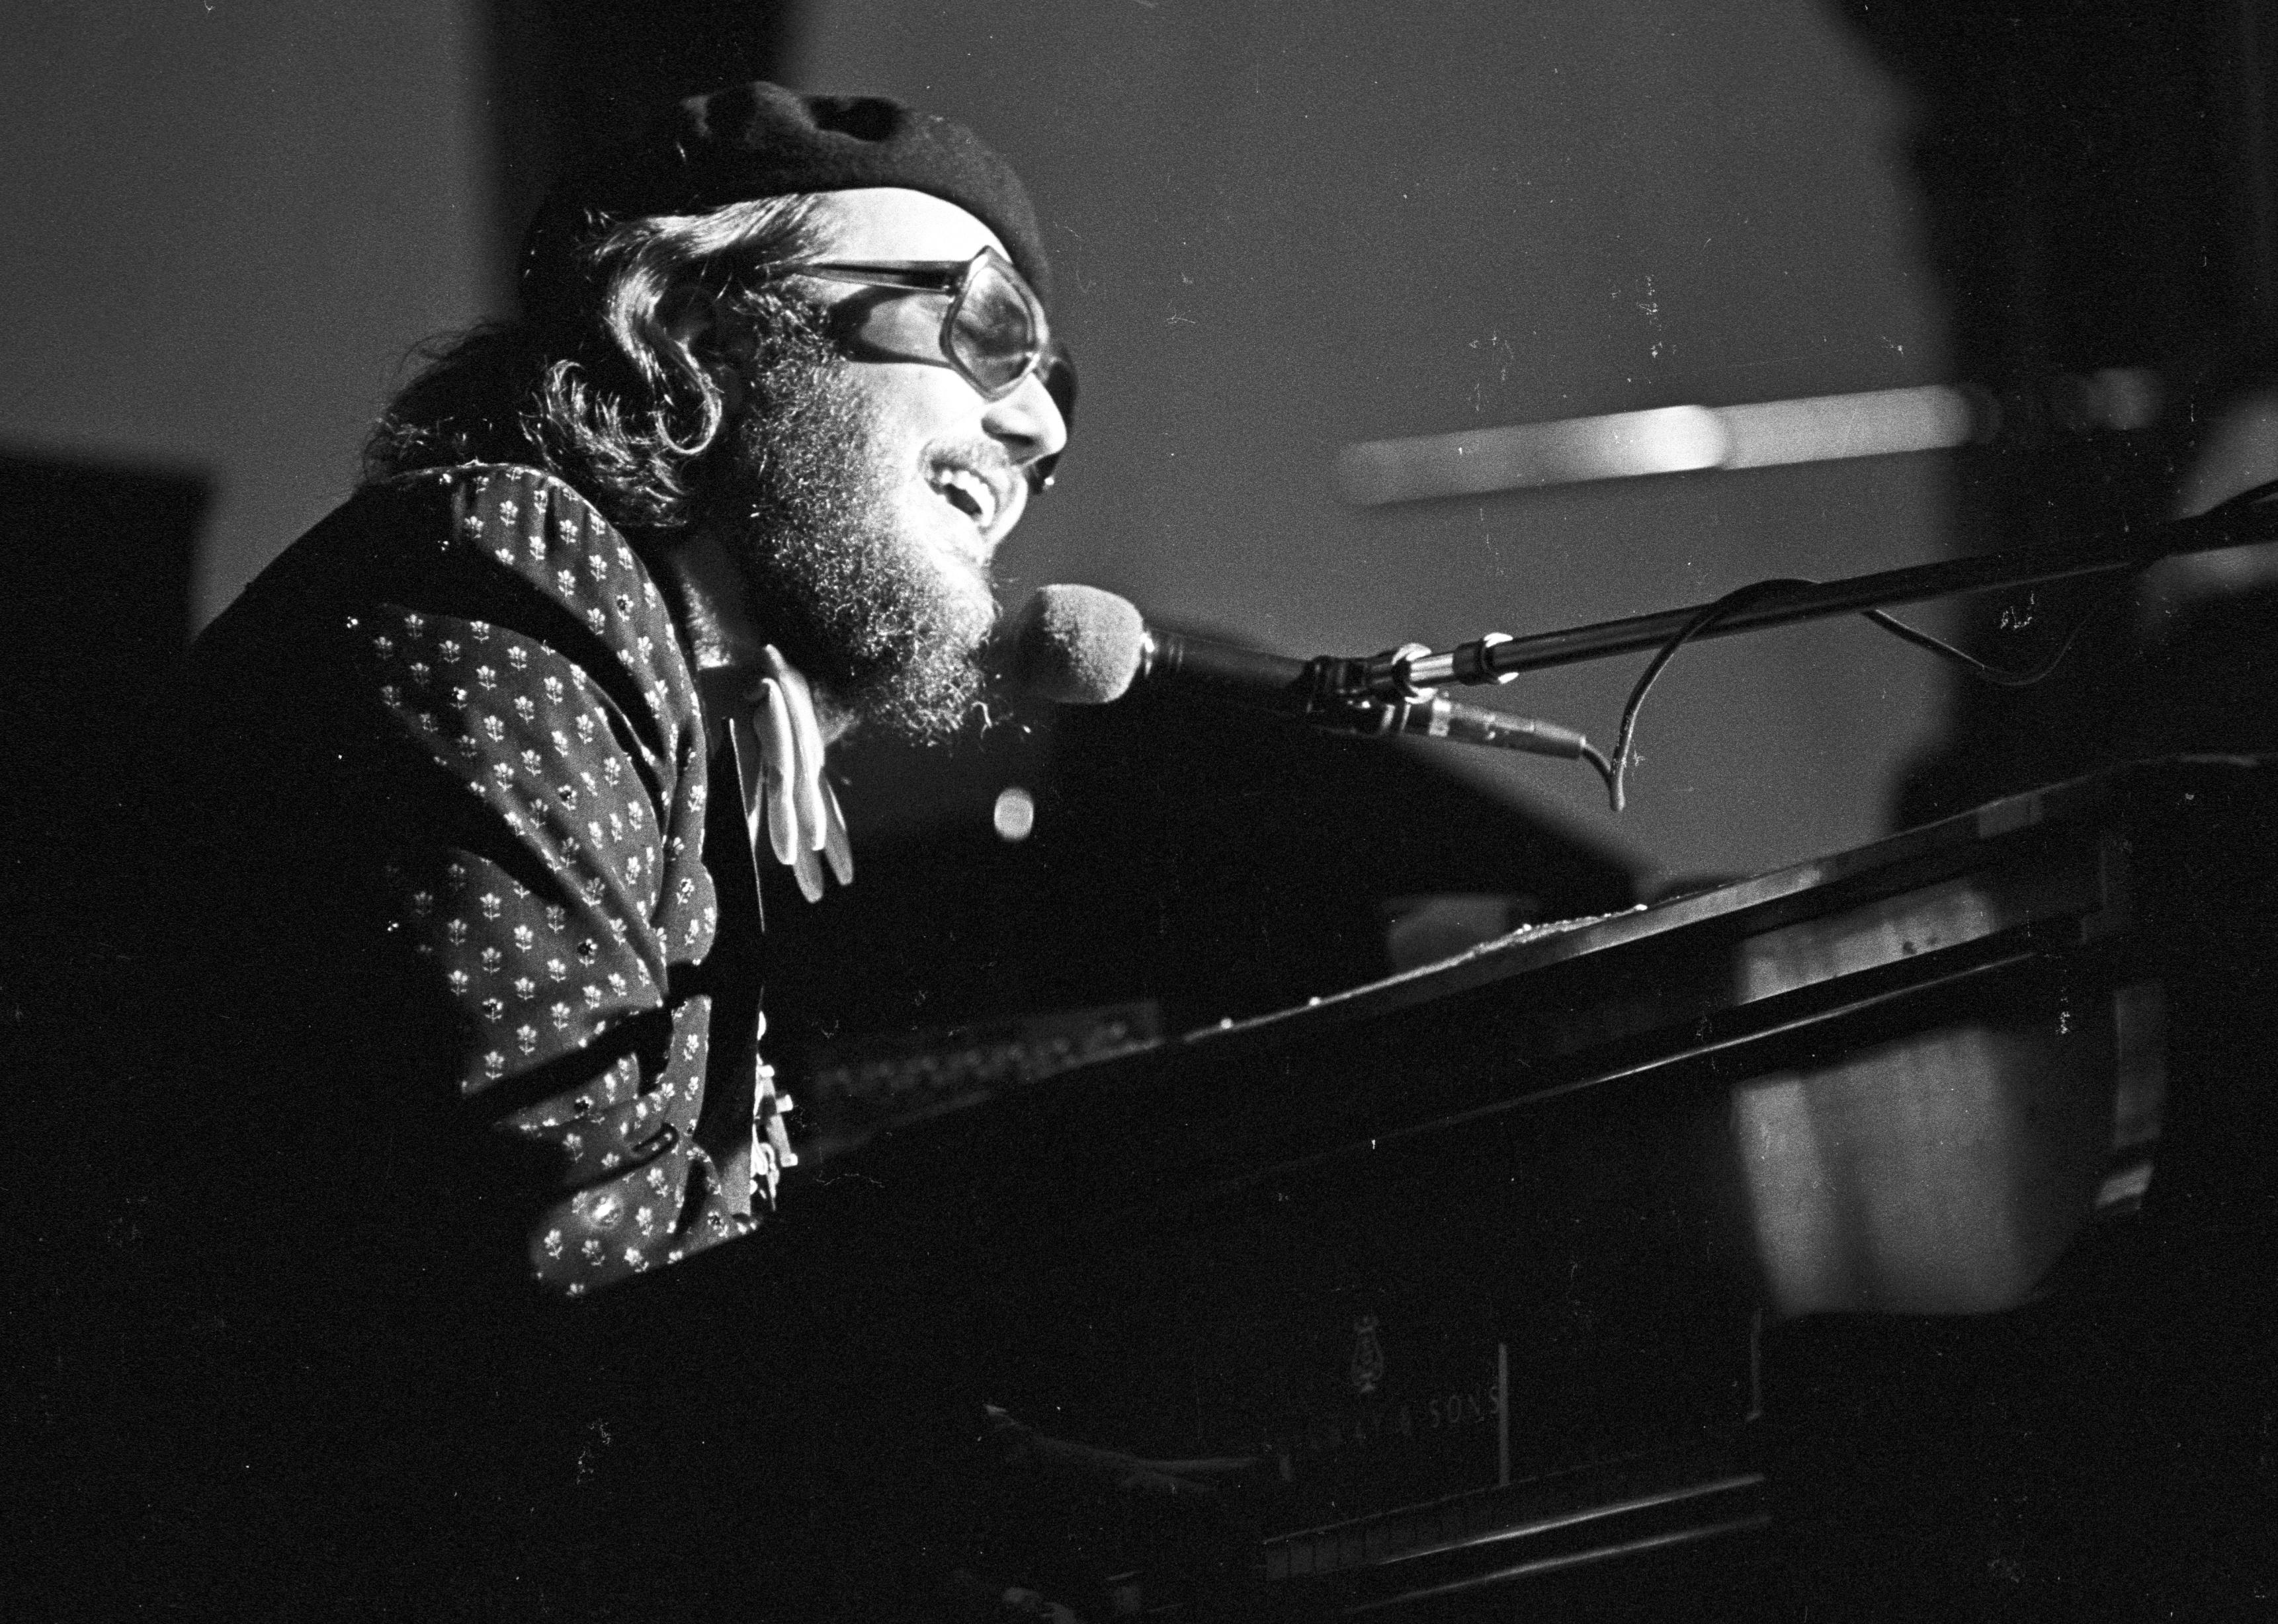 Dr. John performs on stage at The Band's 'The Last Waltz' concert.